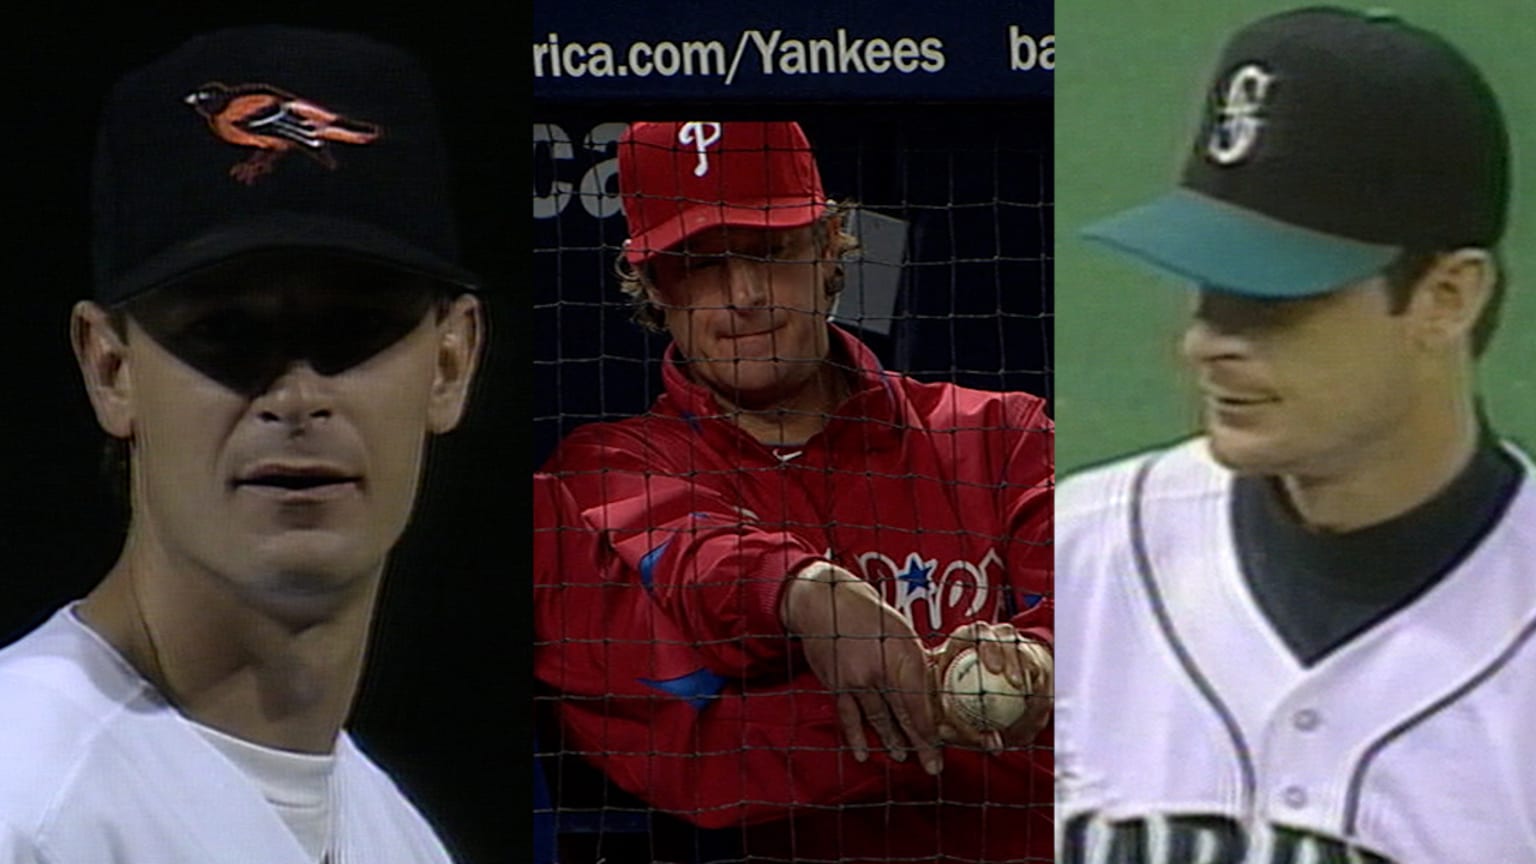 Jamie Moyer's gonna break a lot of records